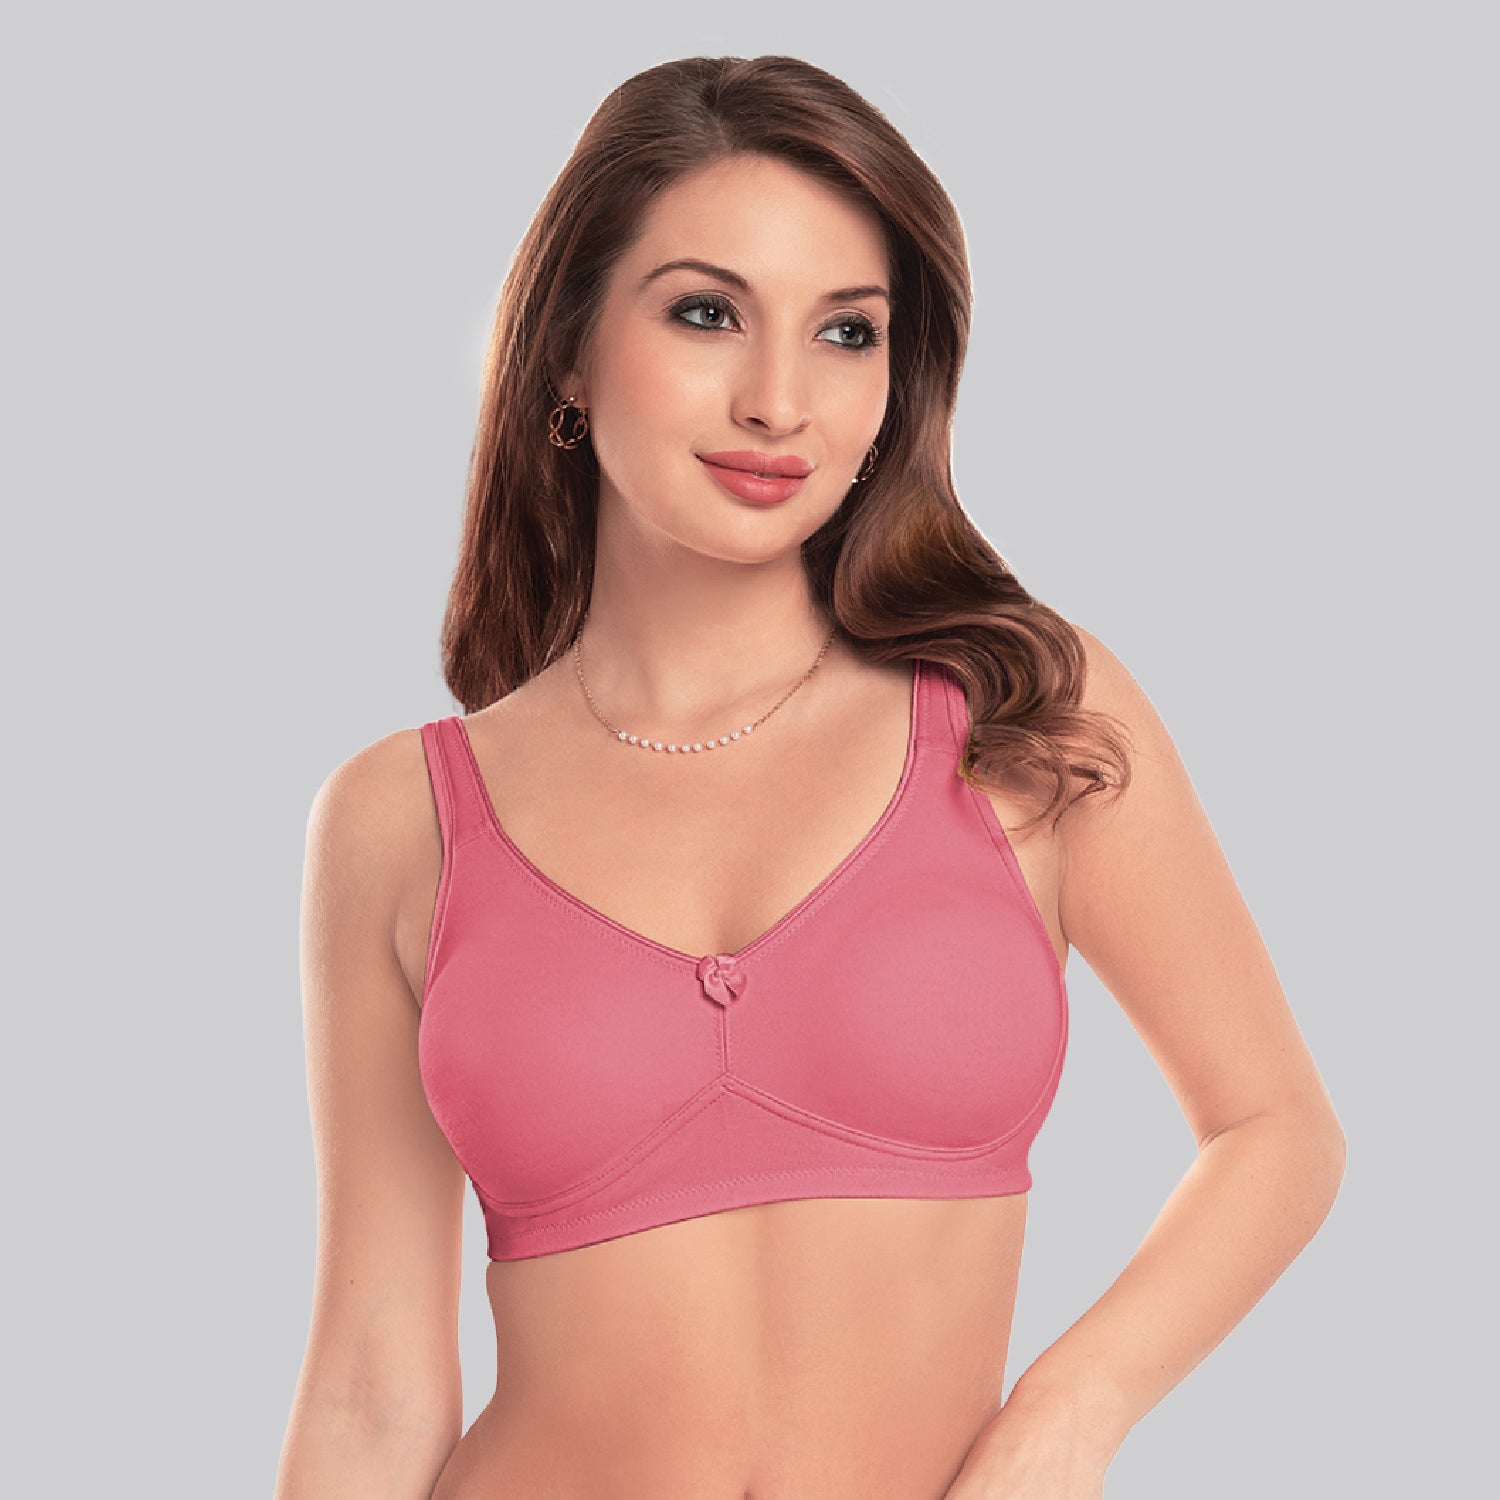 Pink Lace Exotic Lingerie at Rs 150/piece in Jaipur